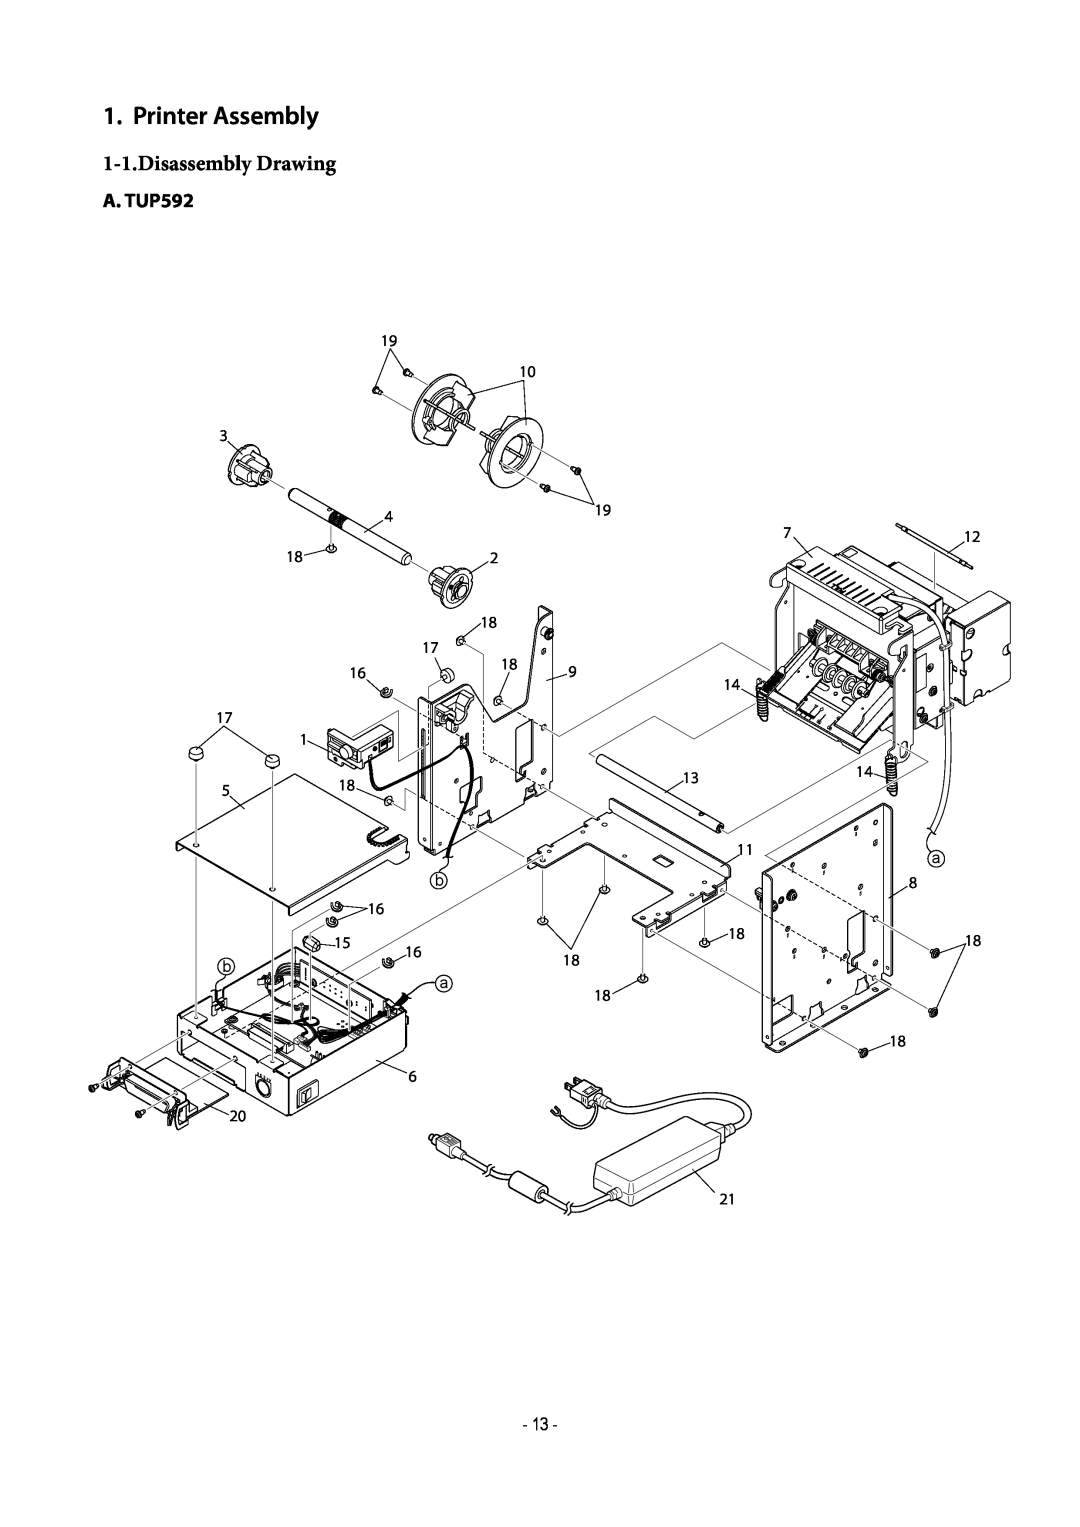 Star Micronics TUP500 technical manual Printer Assembly, Disassembly Drawing 